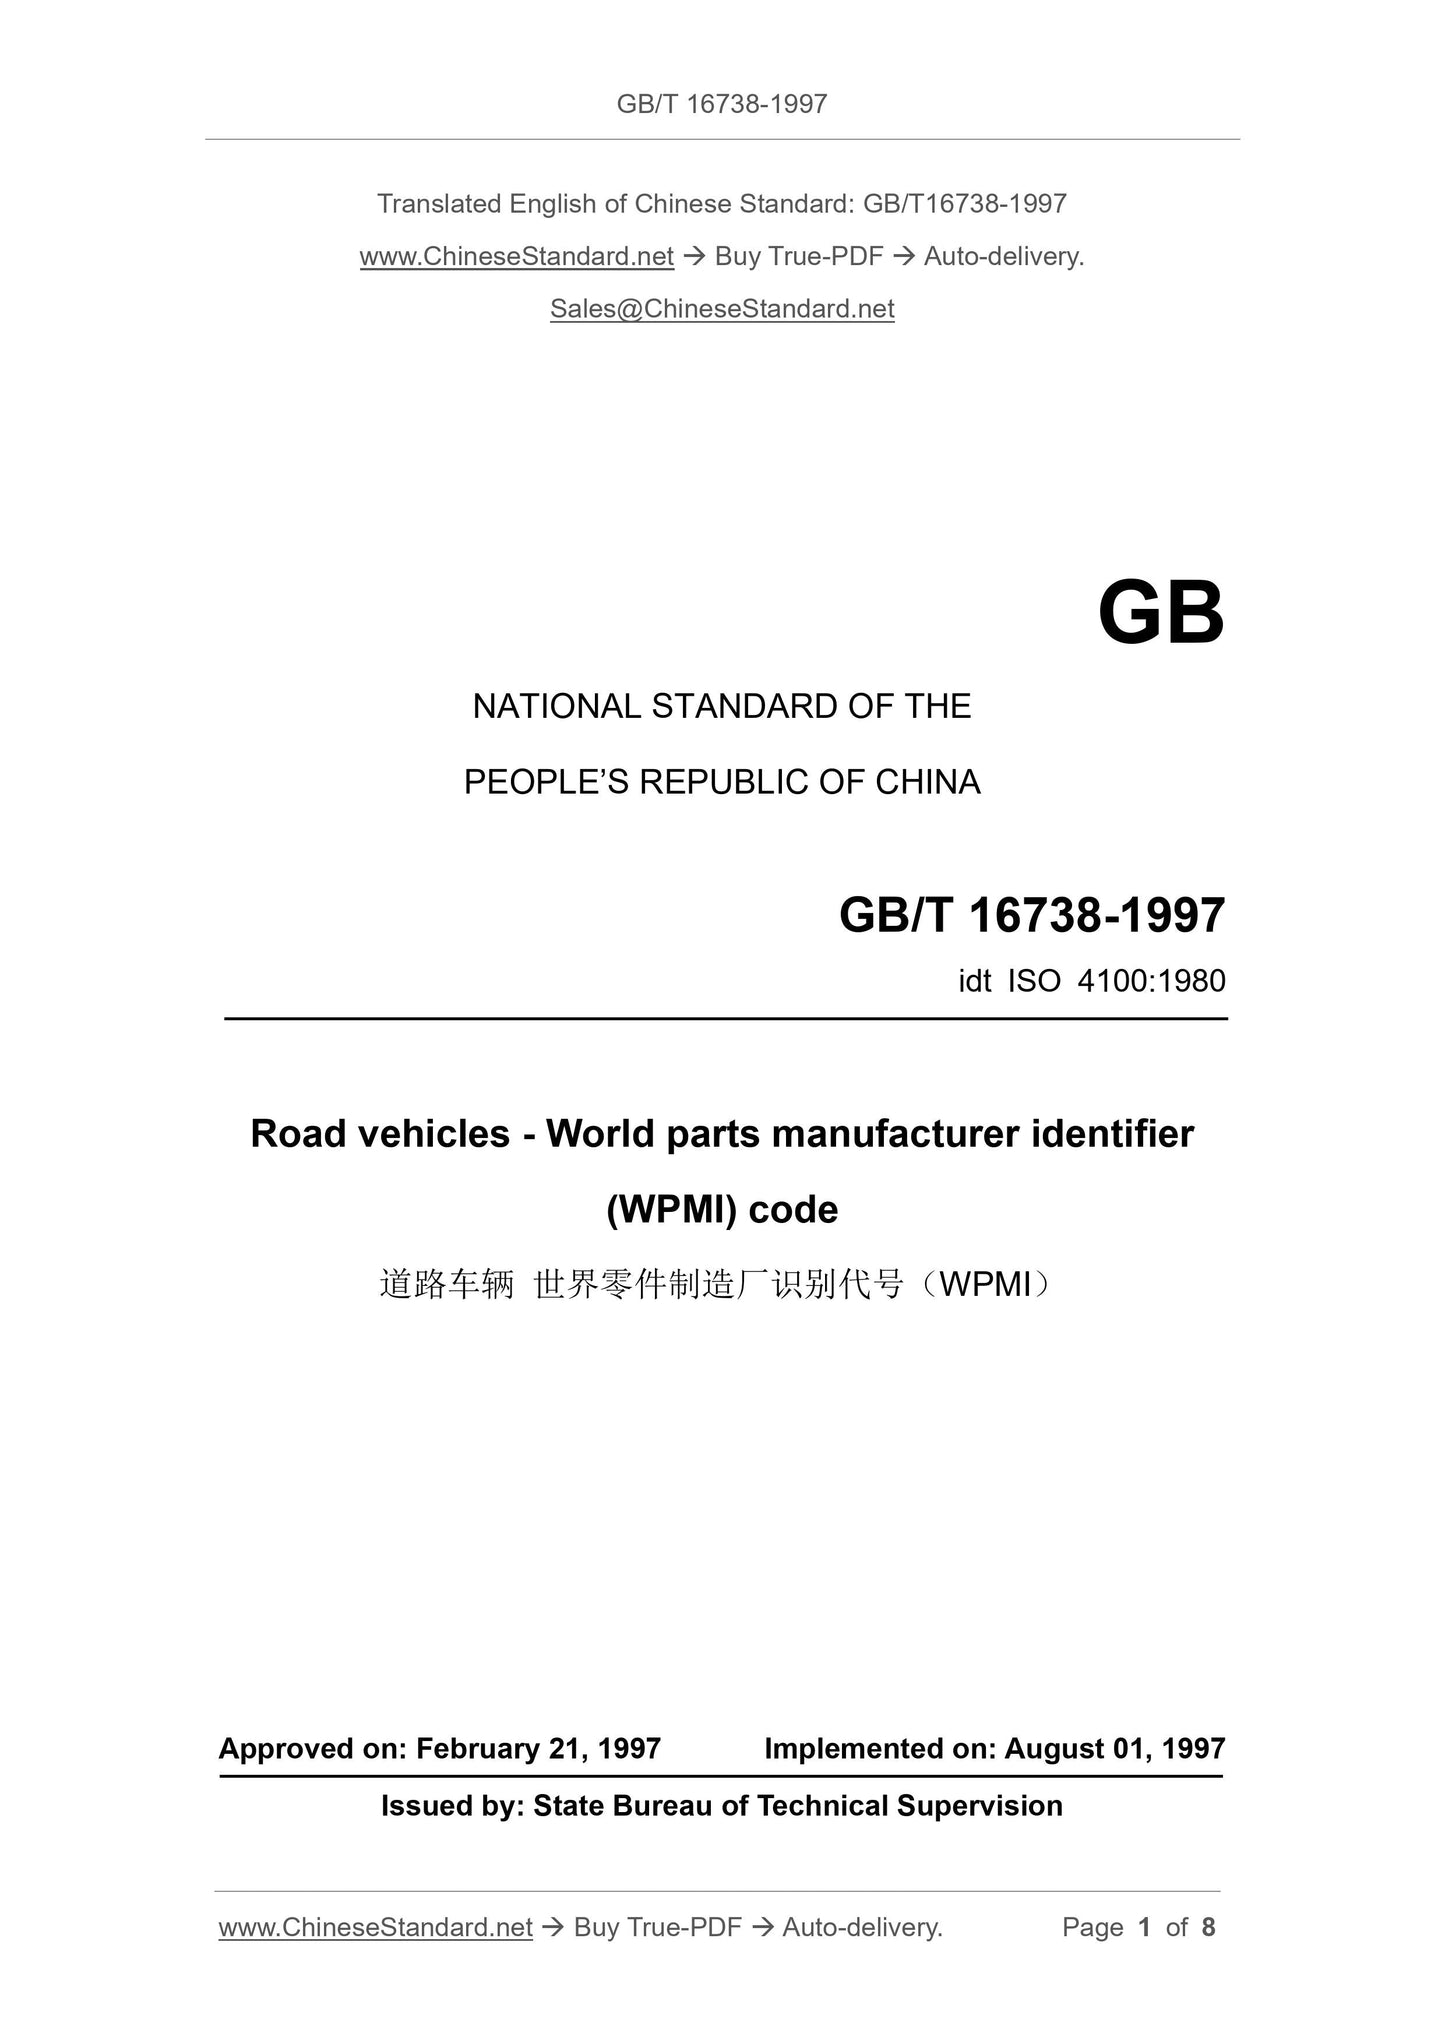 GB/T 16738-1997 Page 1